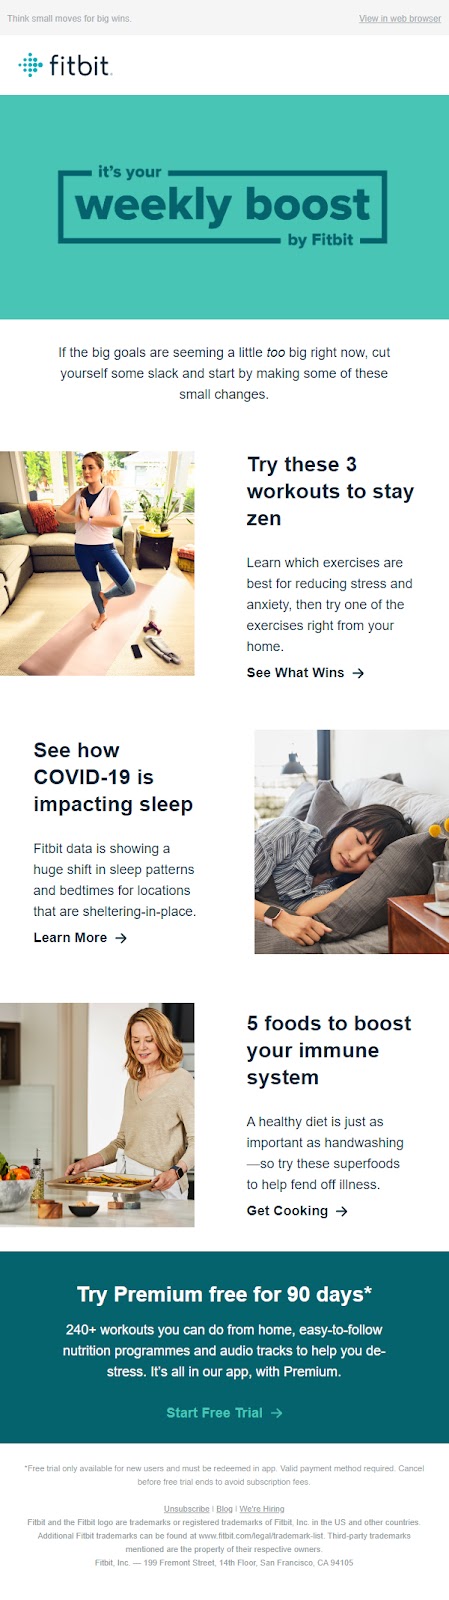 fitbit email lists 